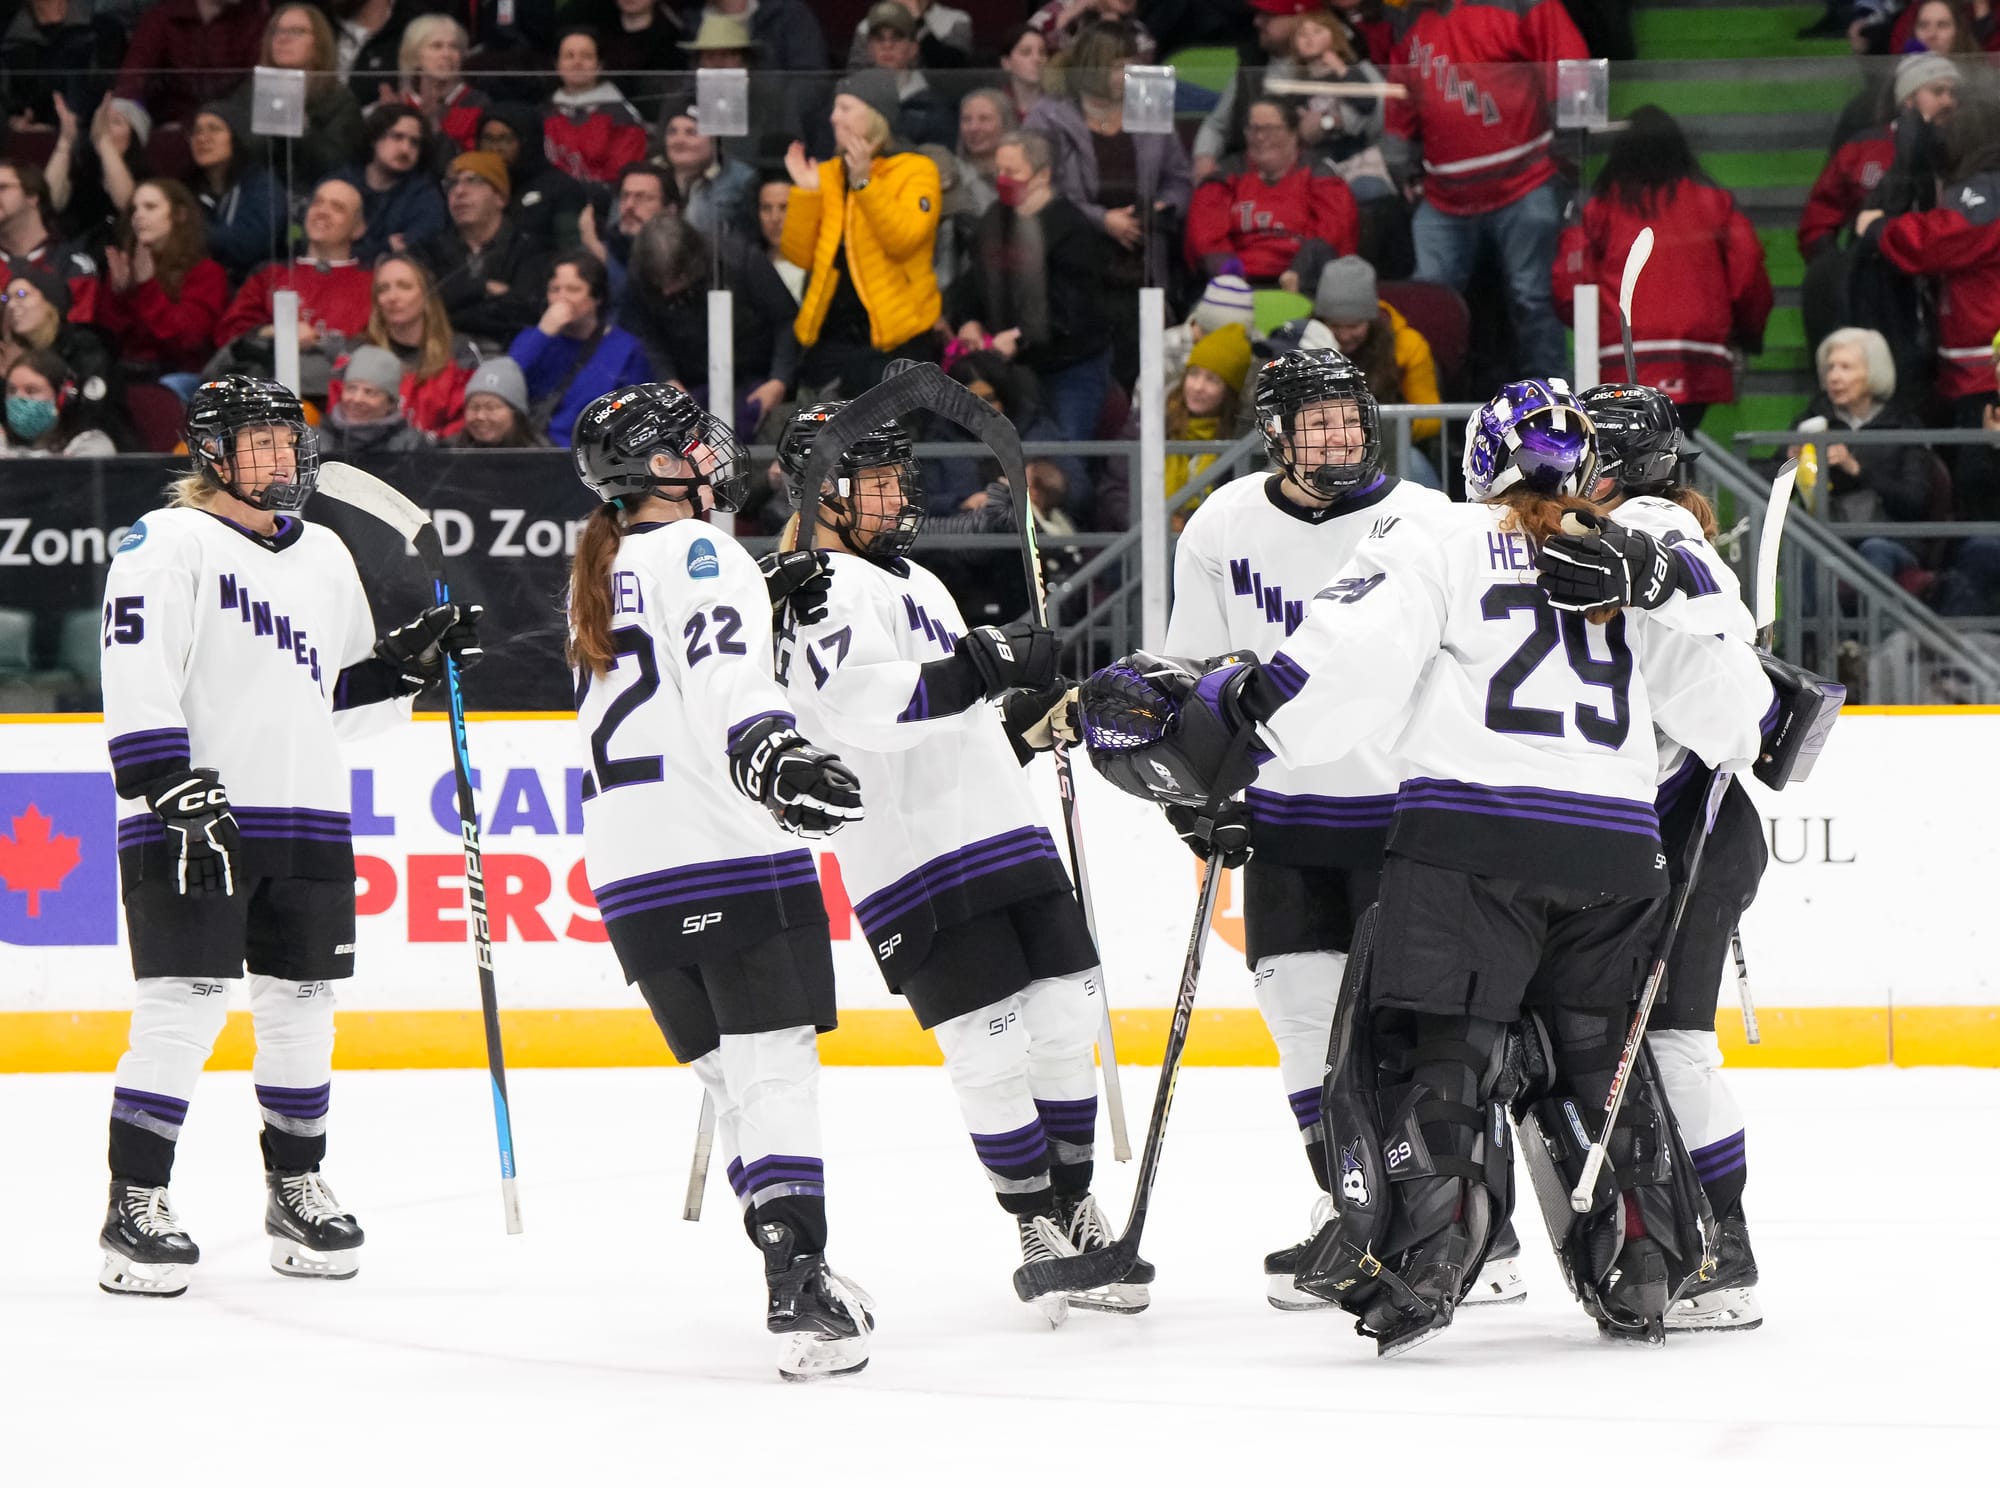 Minnesota players, wearing their white home jerseys, celebrate their win over Ottawa with goaltender Nicole Hensley.